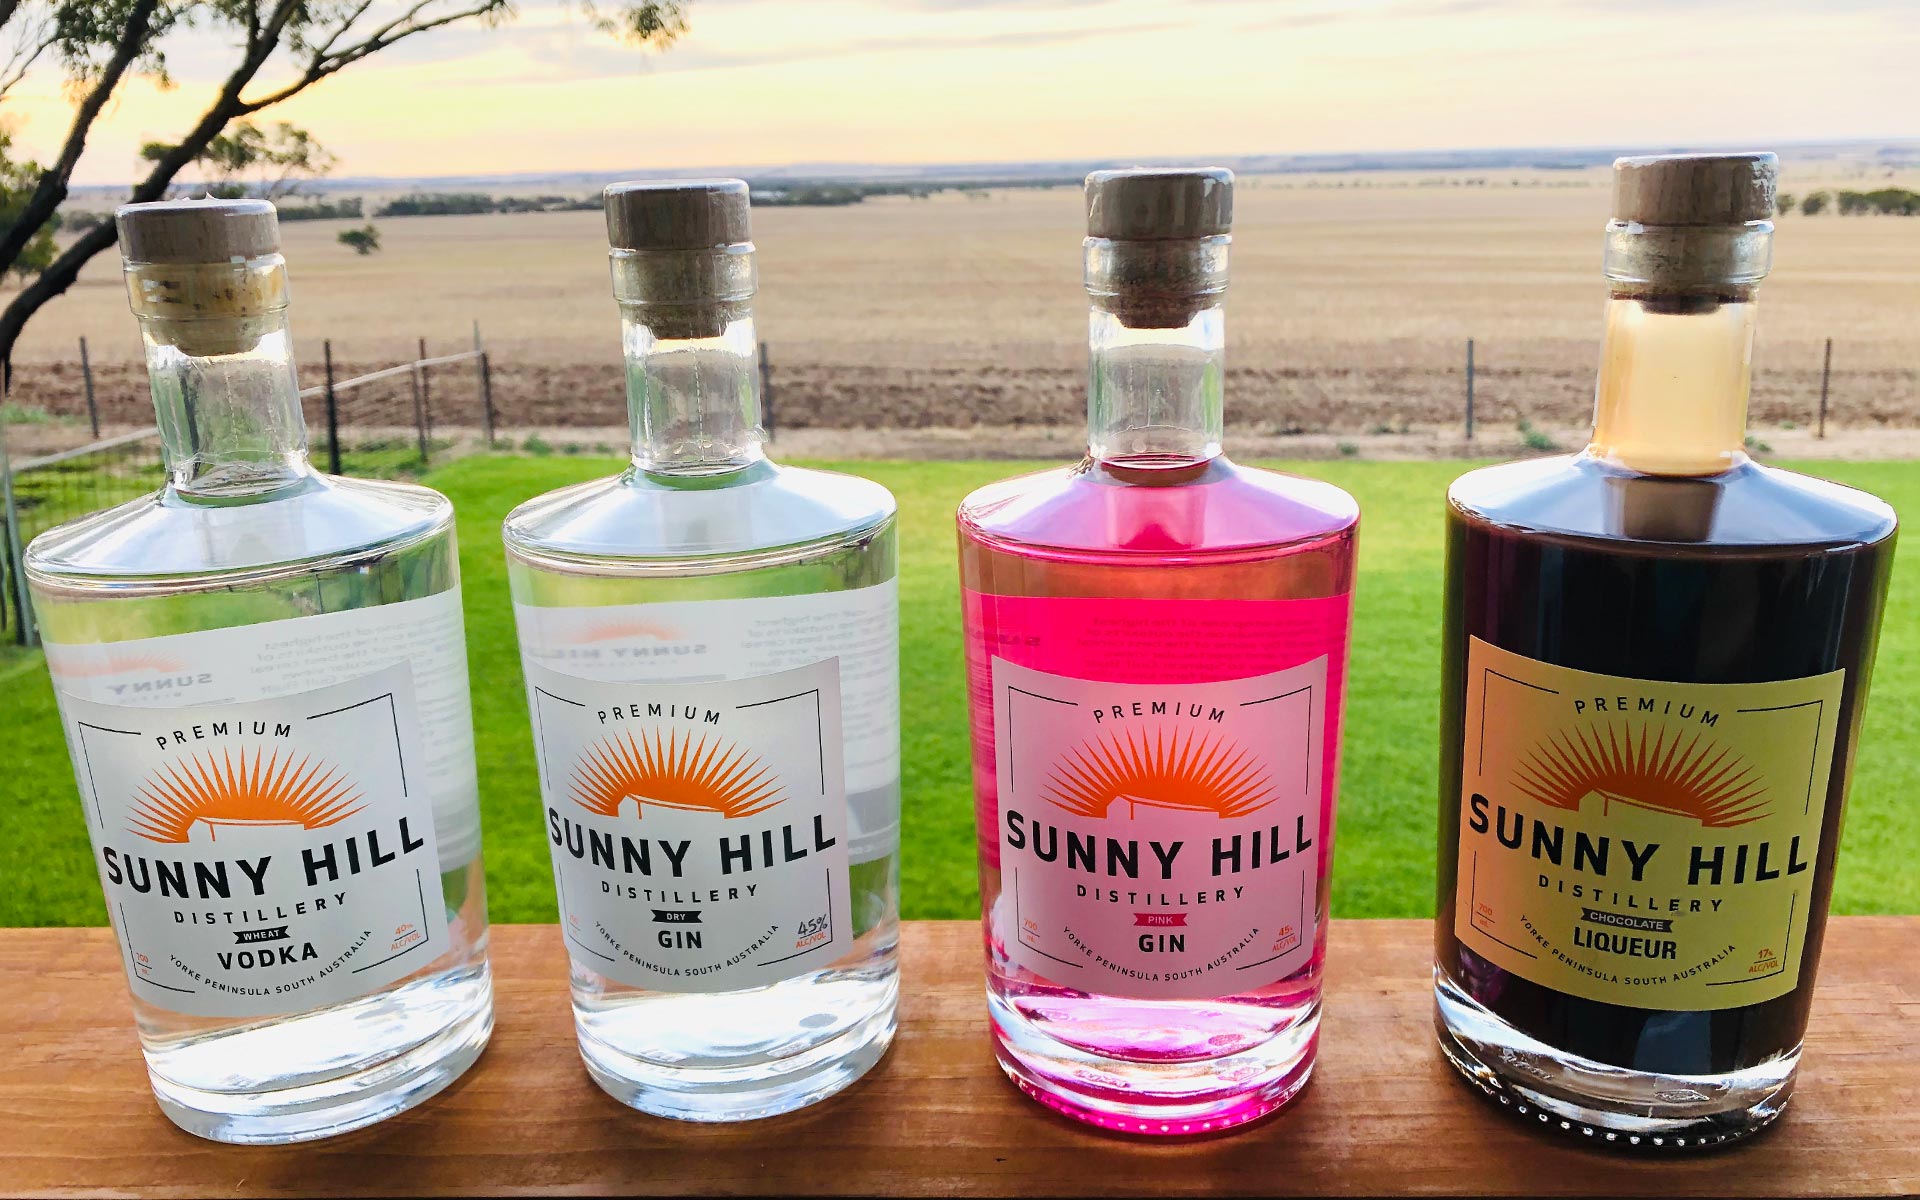 Sunny Hill Distillery Products